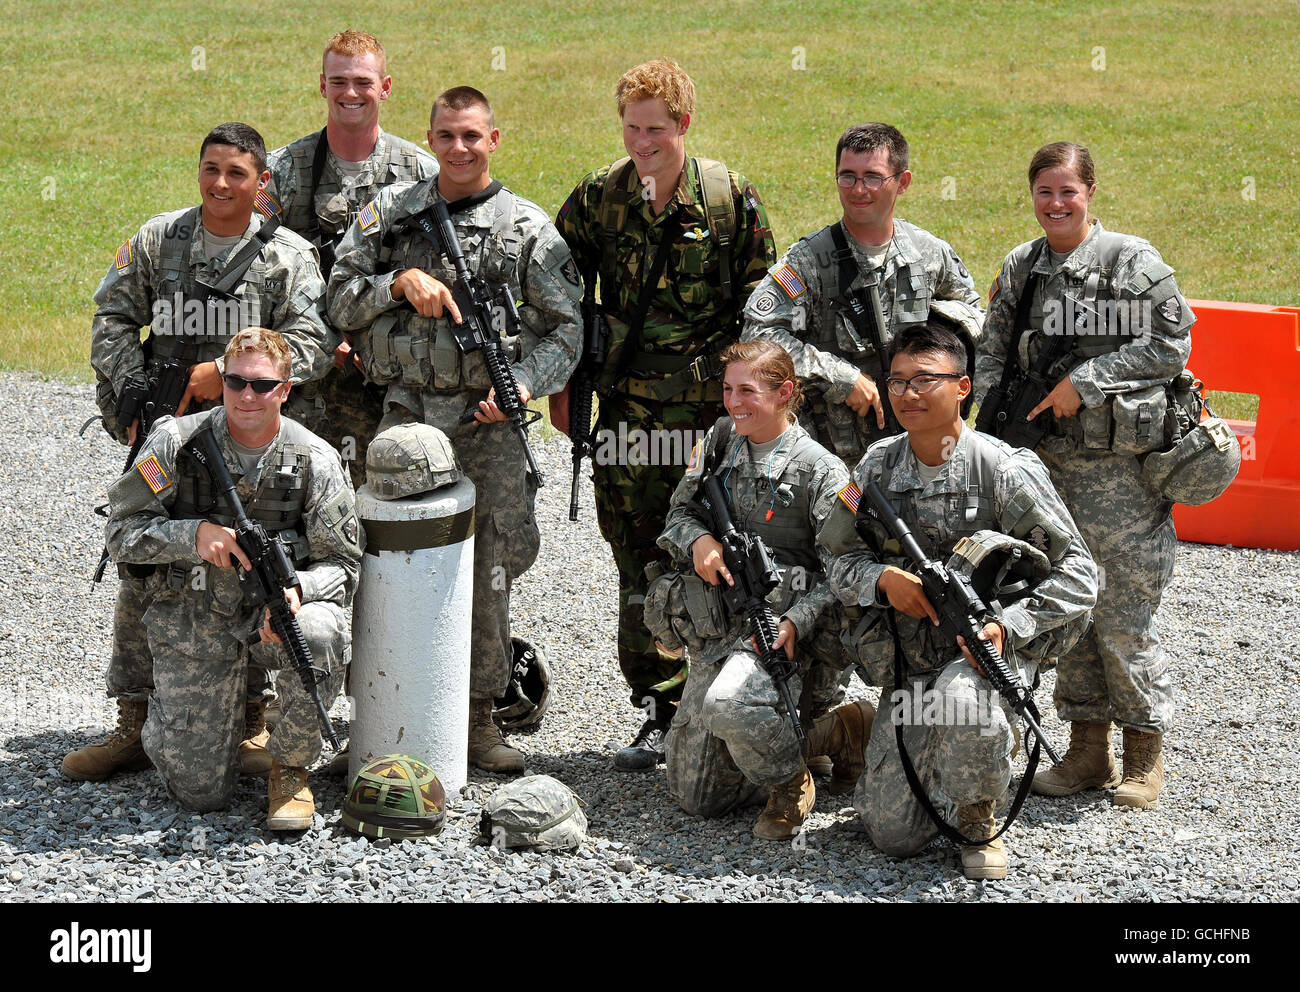 Prince Harry (back row, centre) poses with US Army Officer Cadets after taking part in a live firing exercise at the Fort Buckner shooting ranges at West Point Military Academy in New York state, USA. Stock Photo